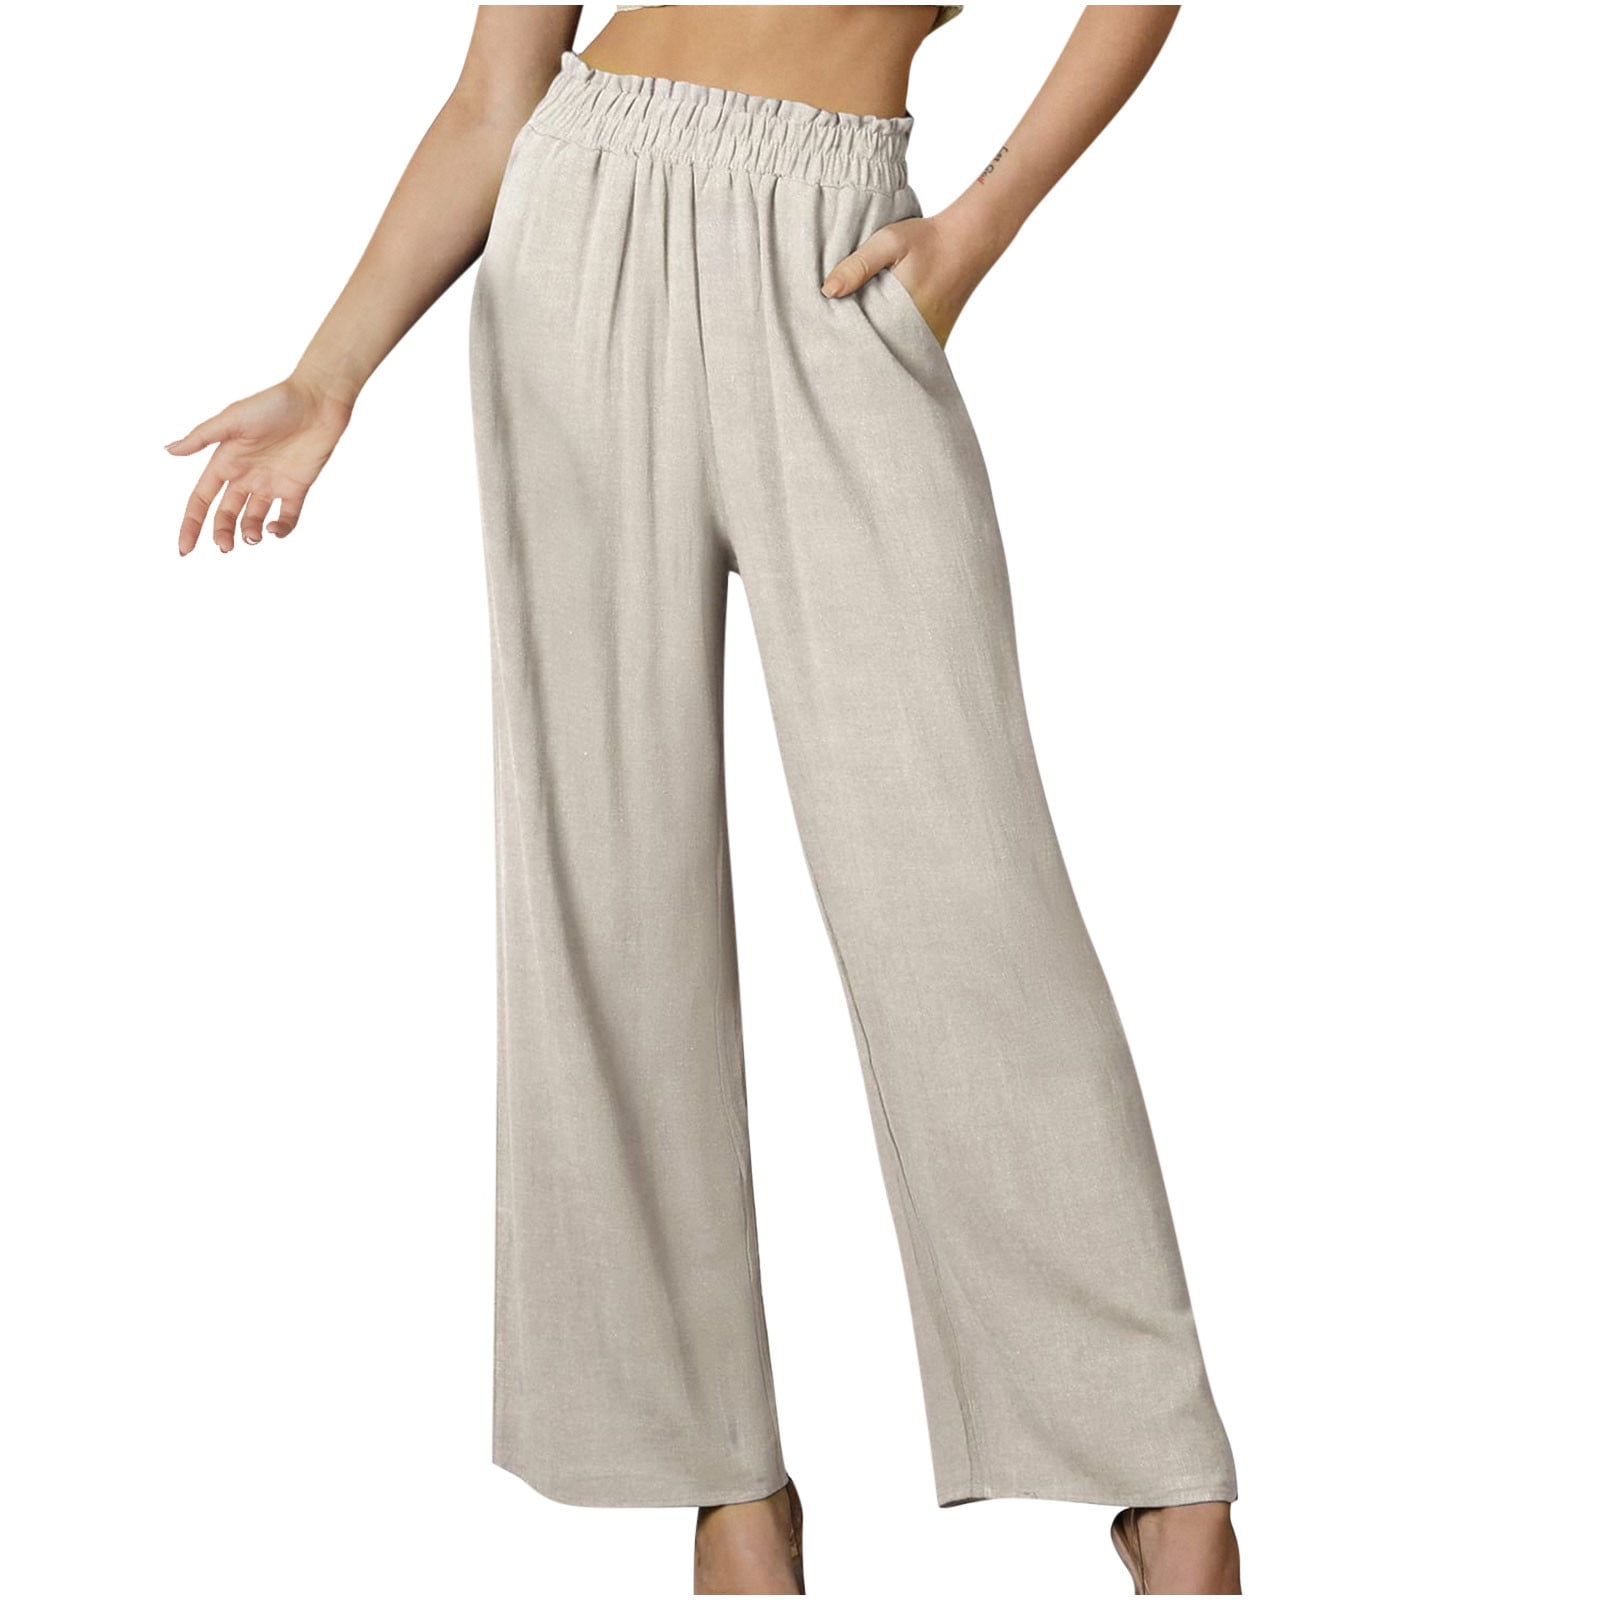 YWDJ High Waisted Wide Leg Pants for Women Tall Fashion Women Casual  Elastic Waist Pocket Solid Color Trousers Long Pants Beige XL 